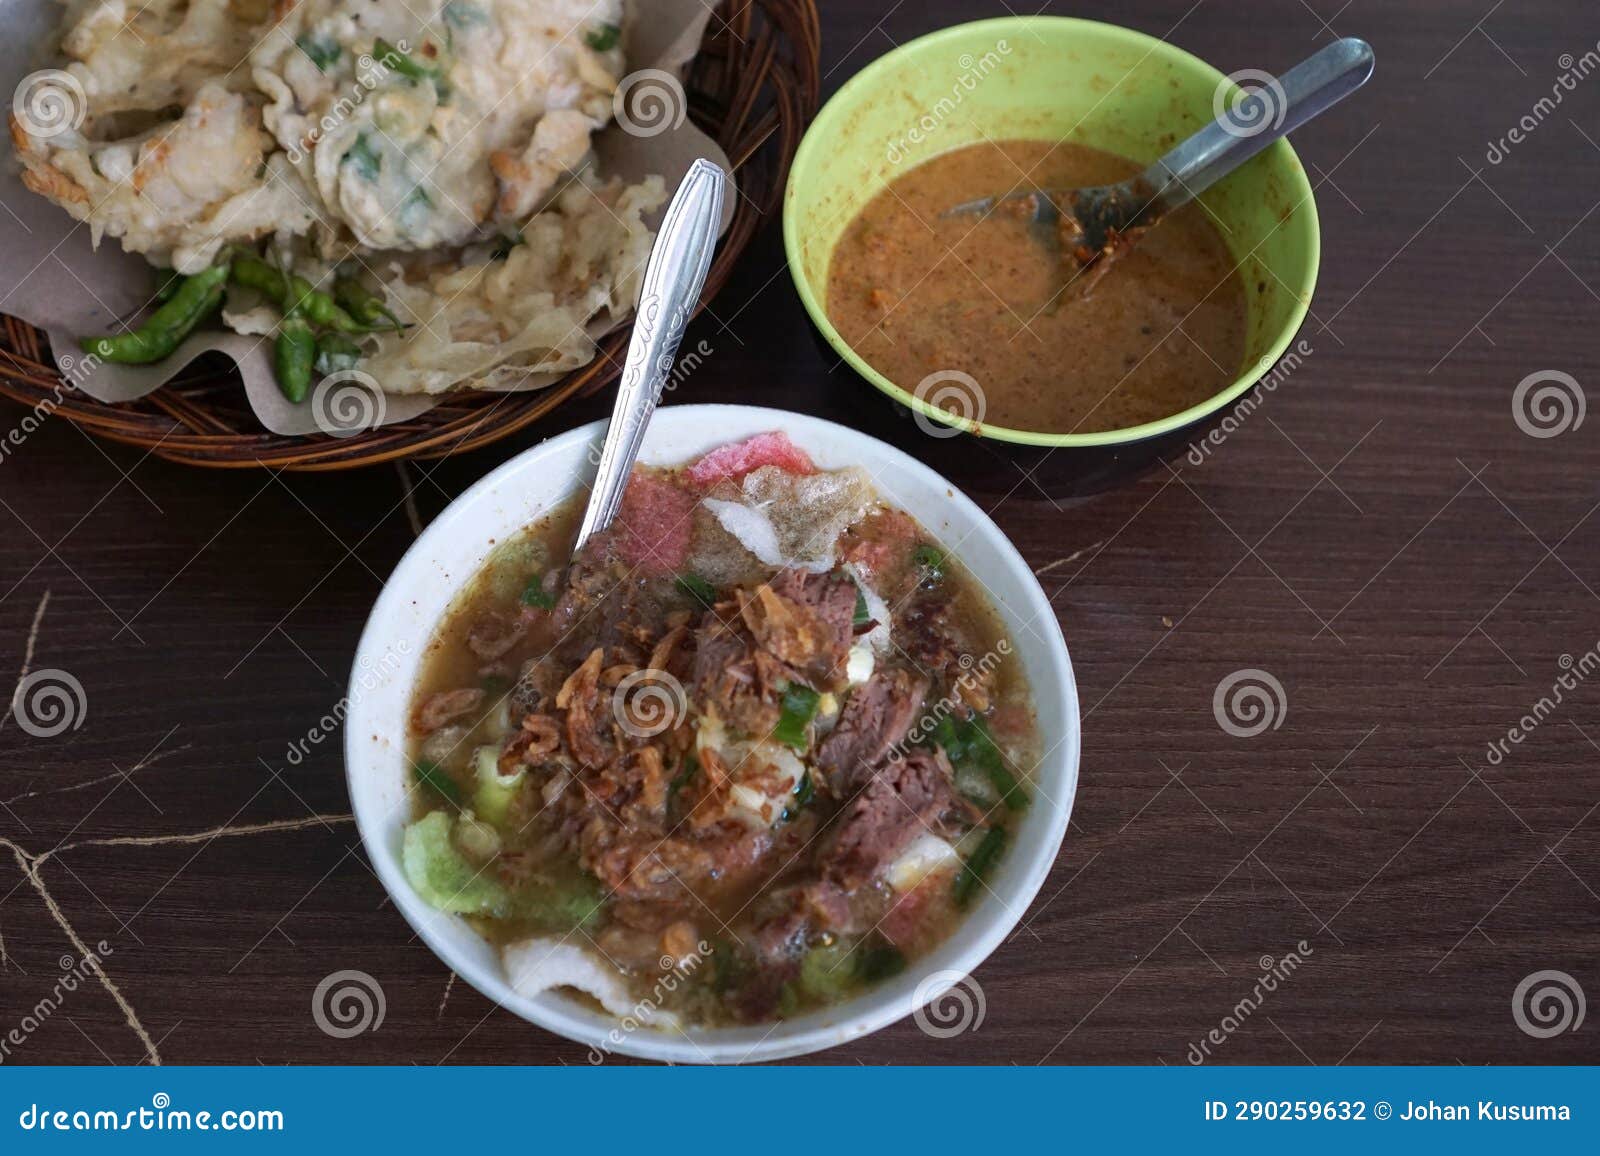 sroto is the name for soto in the banyumas version.